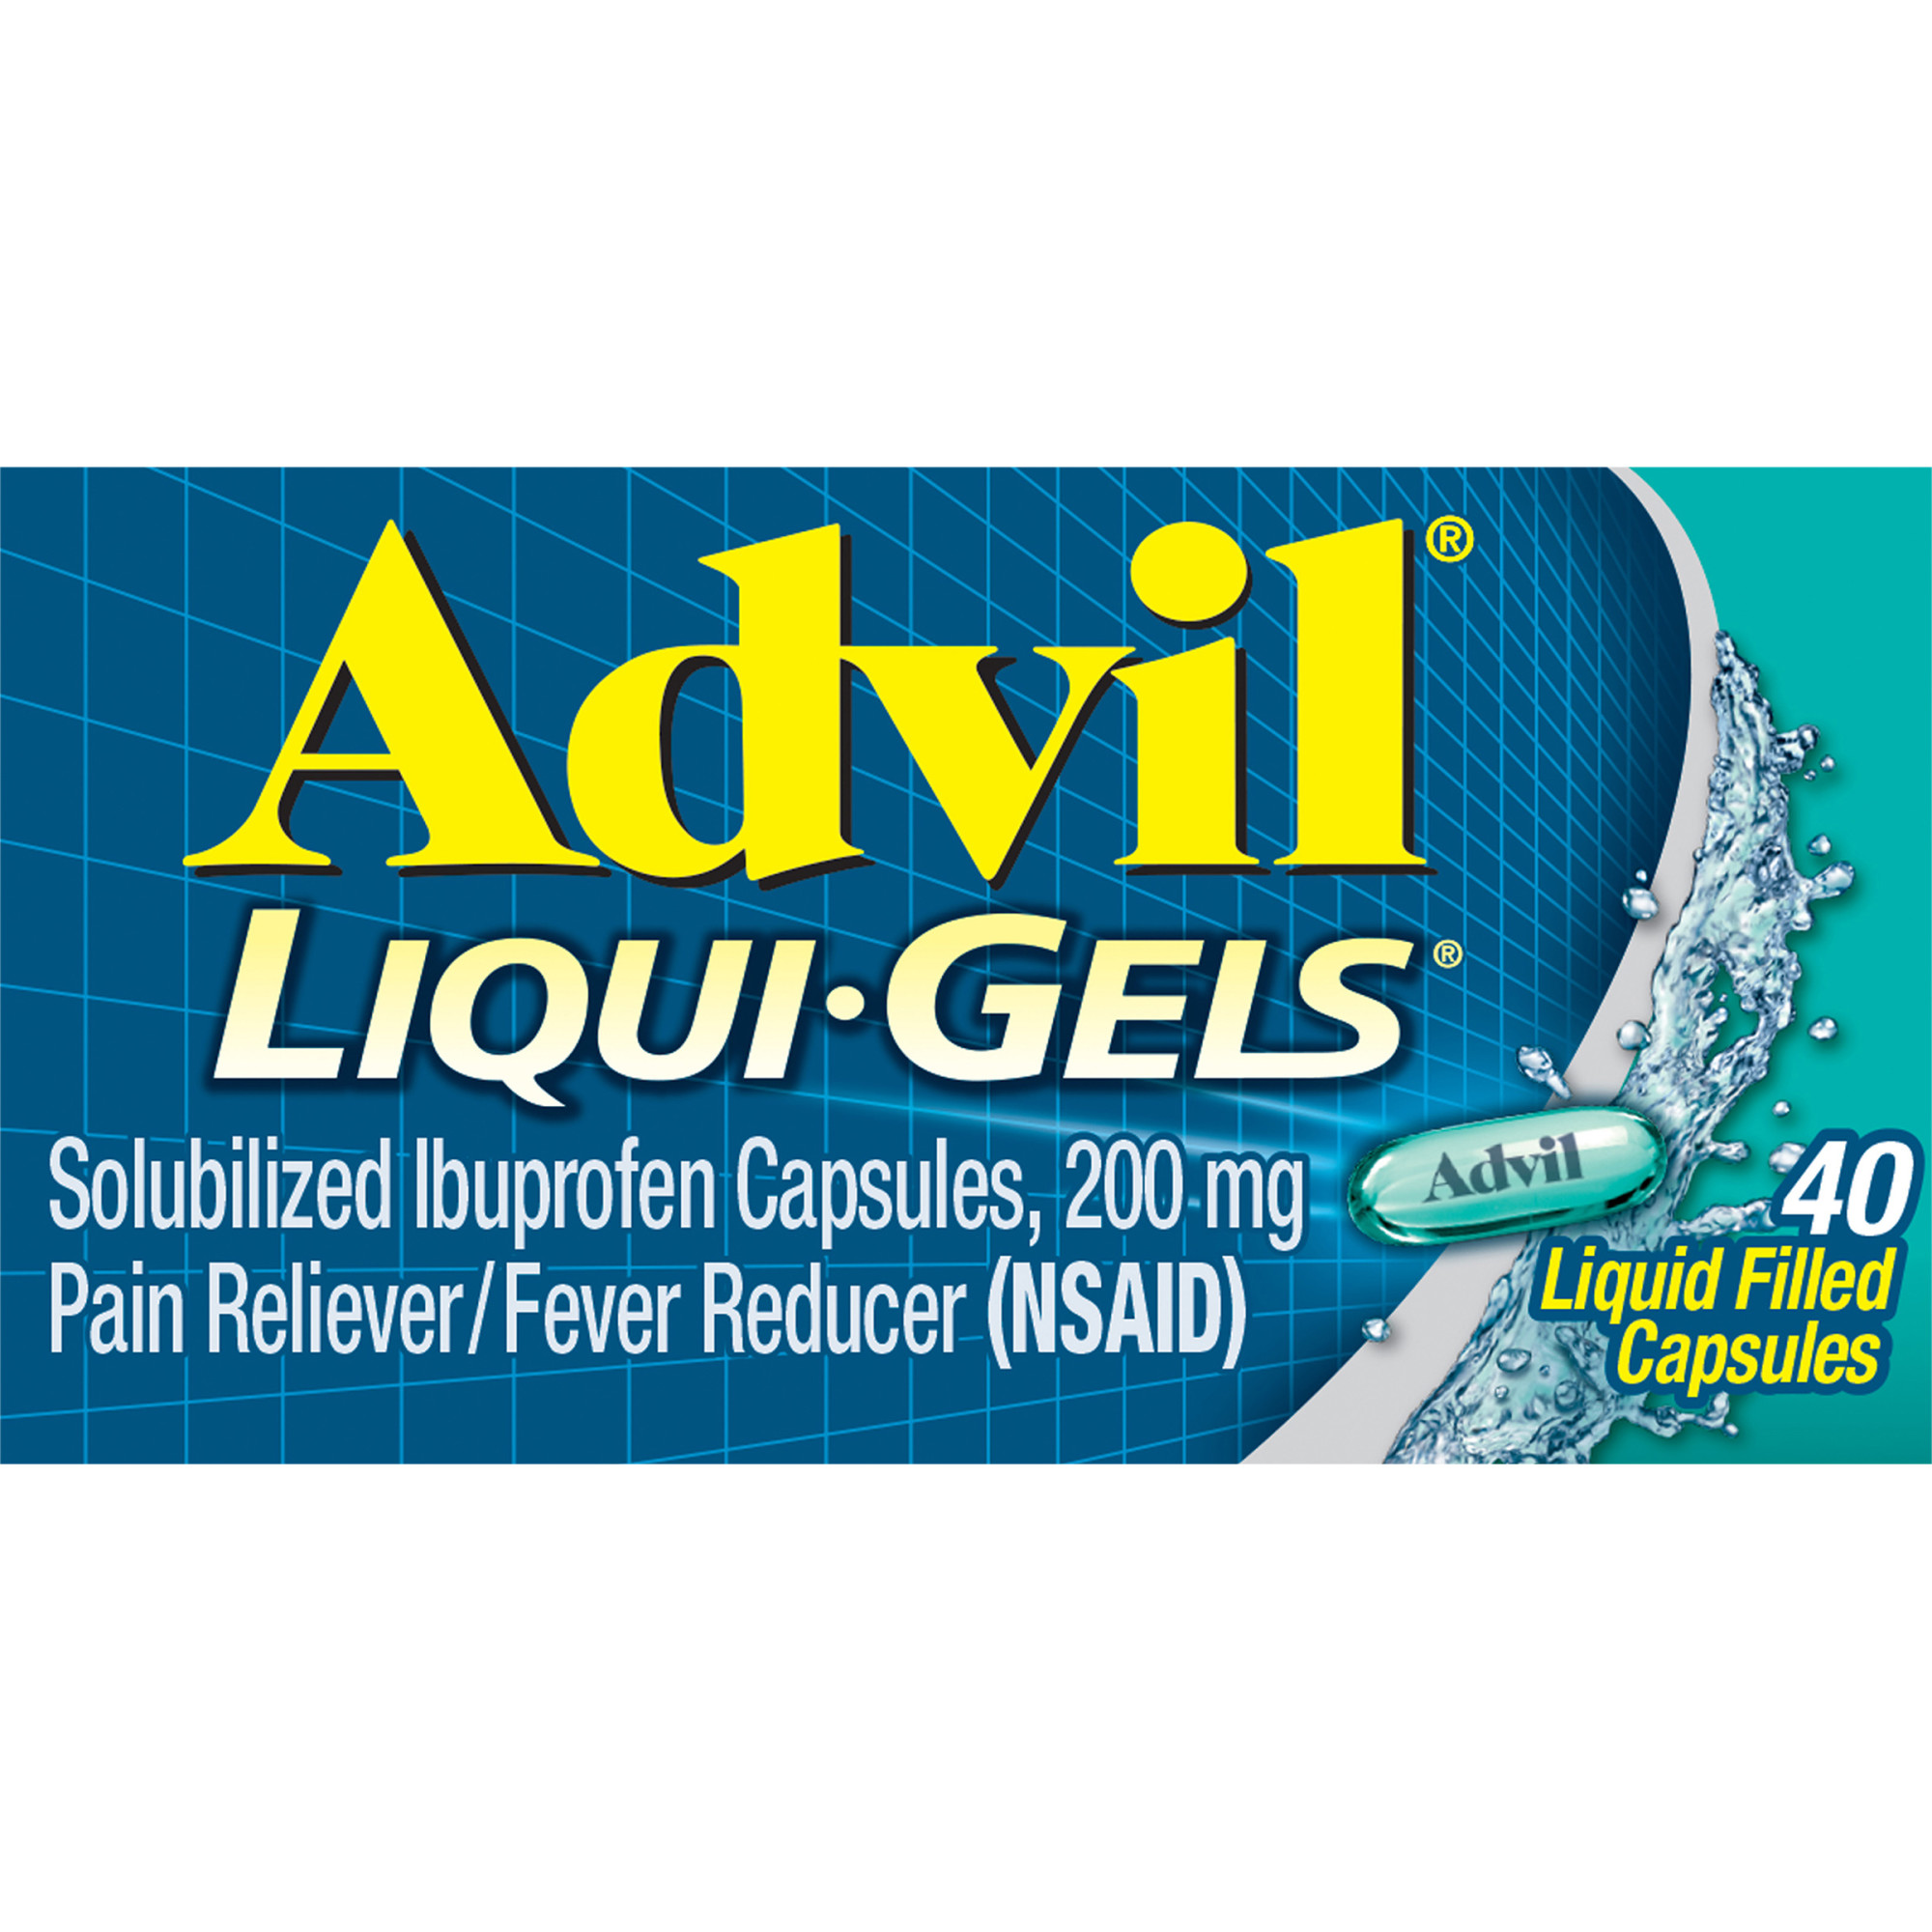 Advil Liqui-Gels Pain Relievers and Fever Reducer Liquid Filled Capsules, 200 Mg Ibuprofen, 40 Count - image 1 of 12